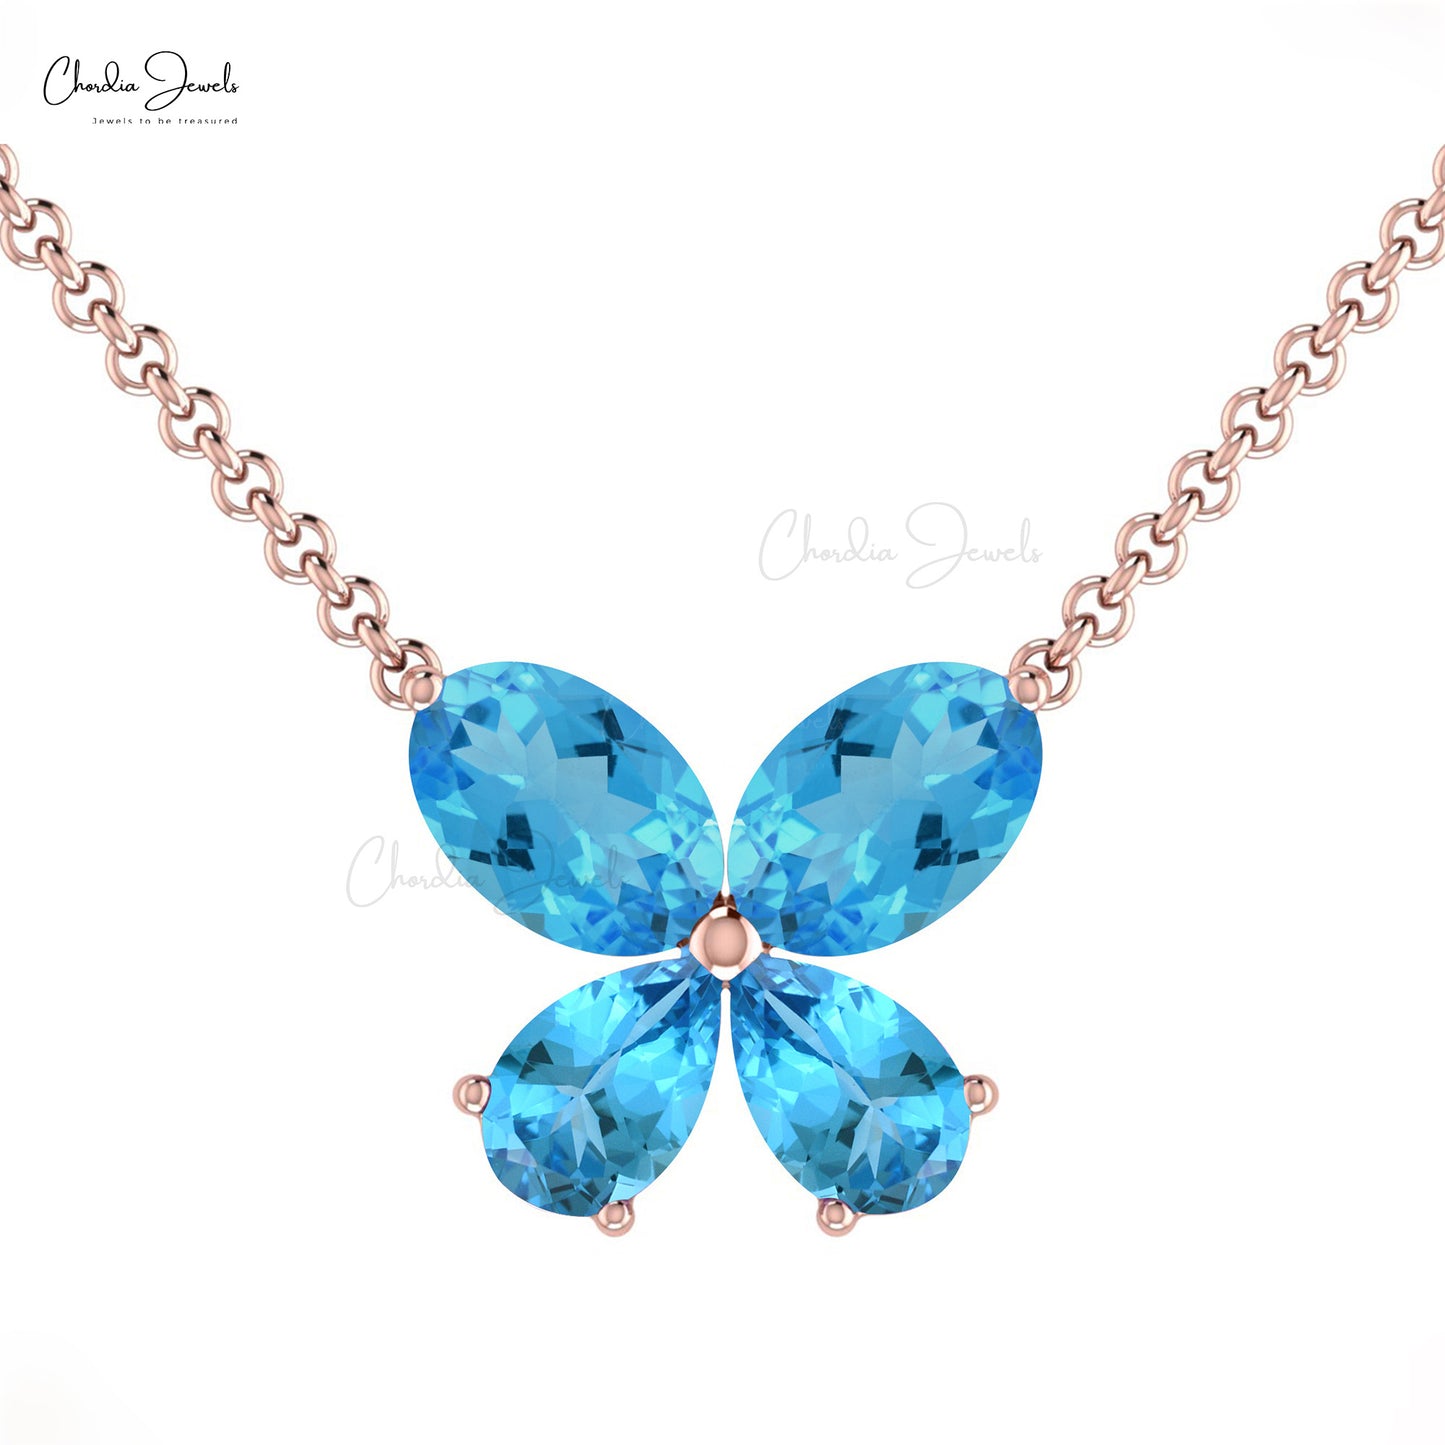 Fashionable Charm Delicate Butterfly Necklace Natural Swiss Blue Topaz Gemstone Necklace Pendant in 14k Pure Gold Anniversary Gift For Wife